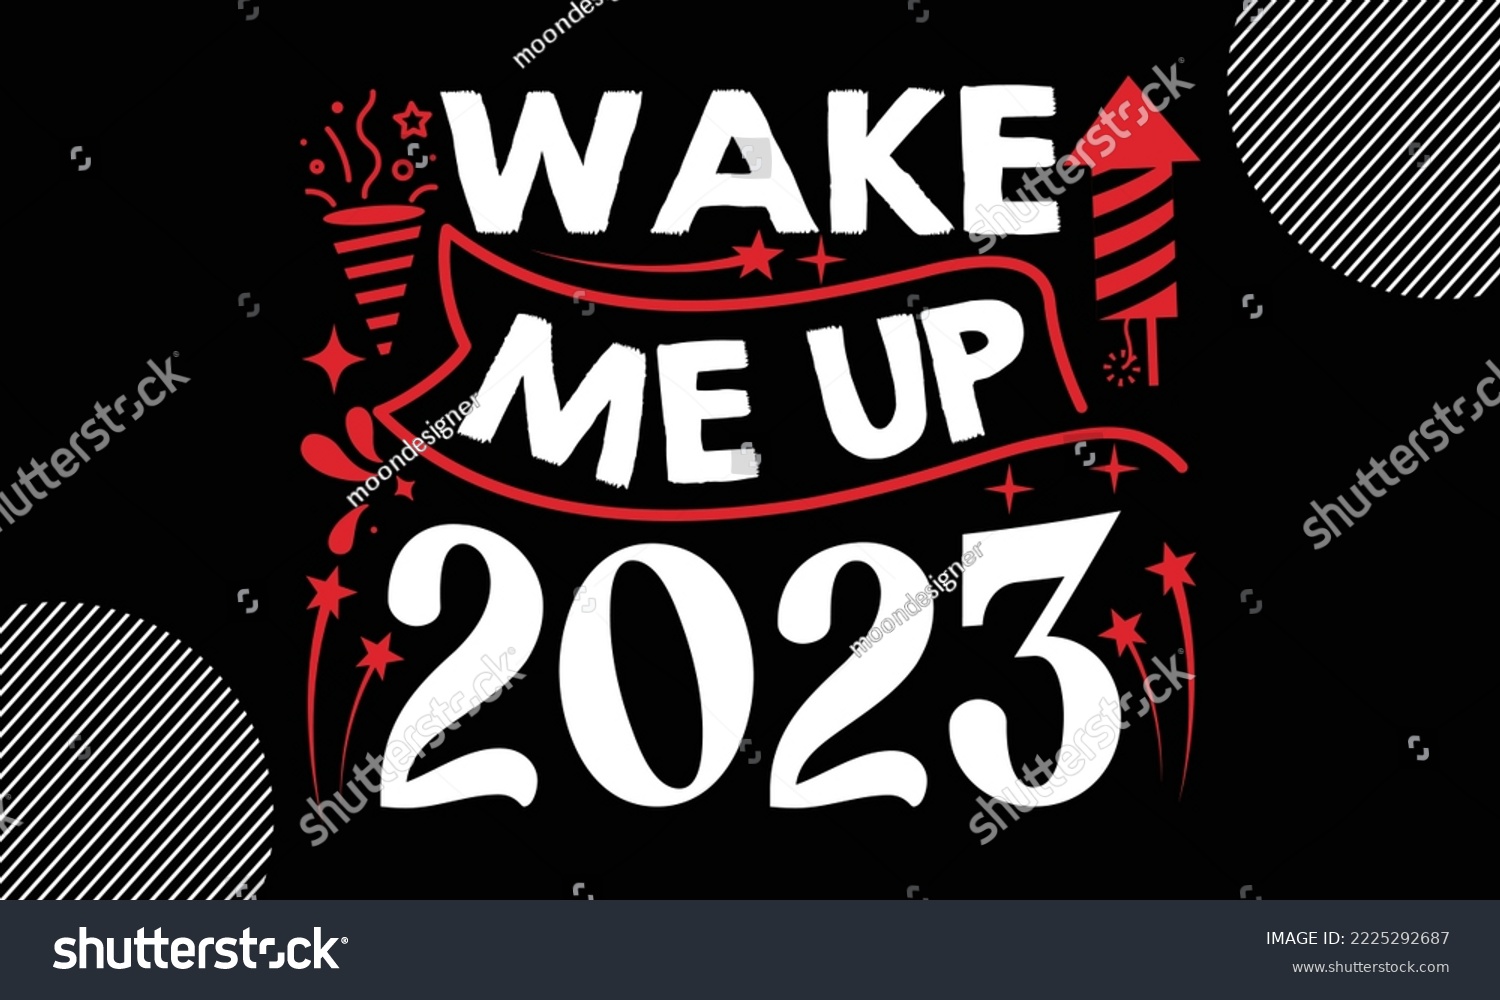 SVG of Wake me up 2023- Happy New Year t shirt Design, lettering vector illustration isolated on Black background, New Year Stickers Quotas, bag, cups, card, gift and other printing, SVG Files for Cutting svg